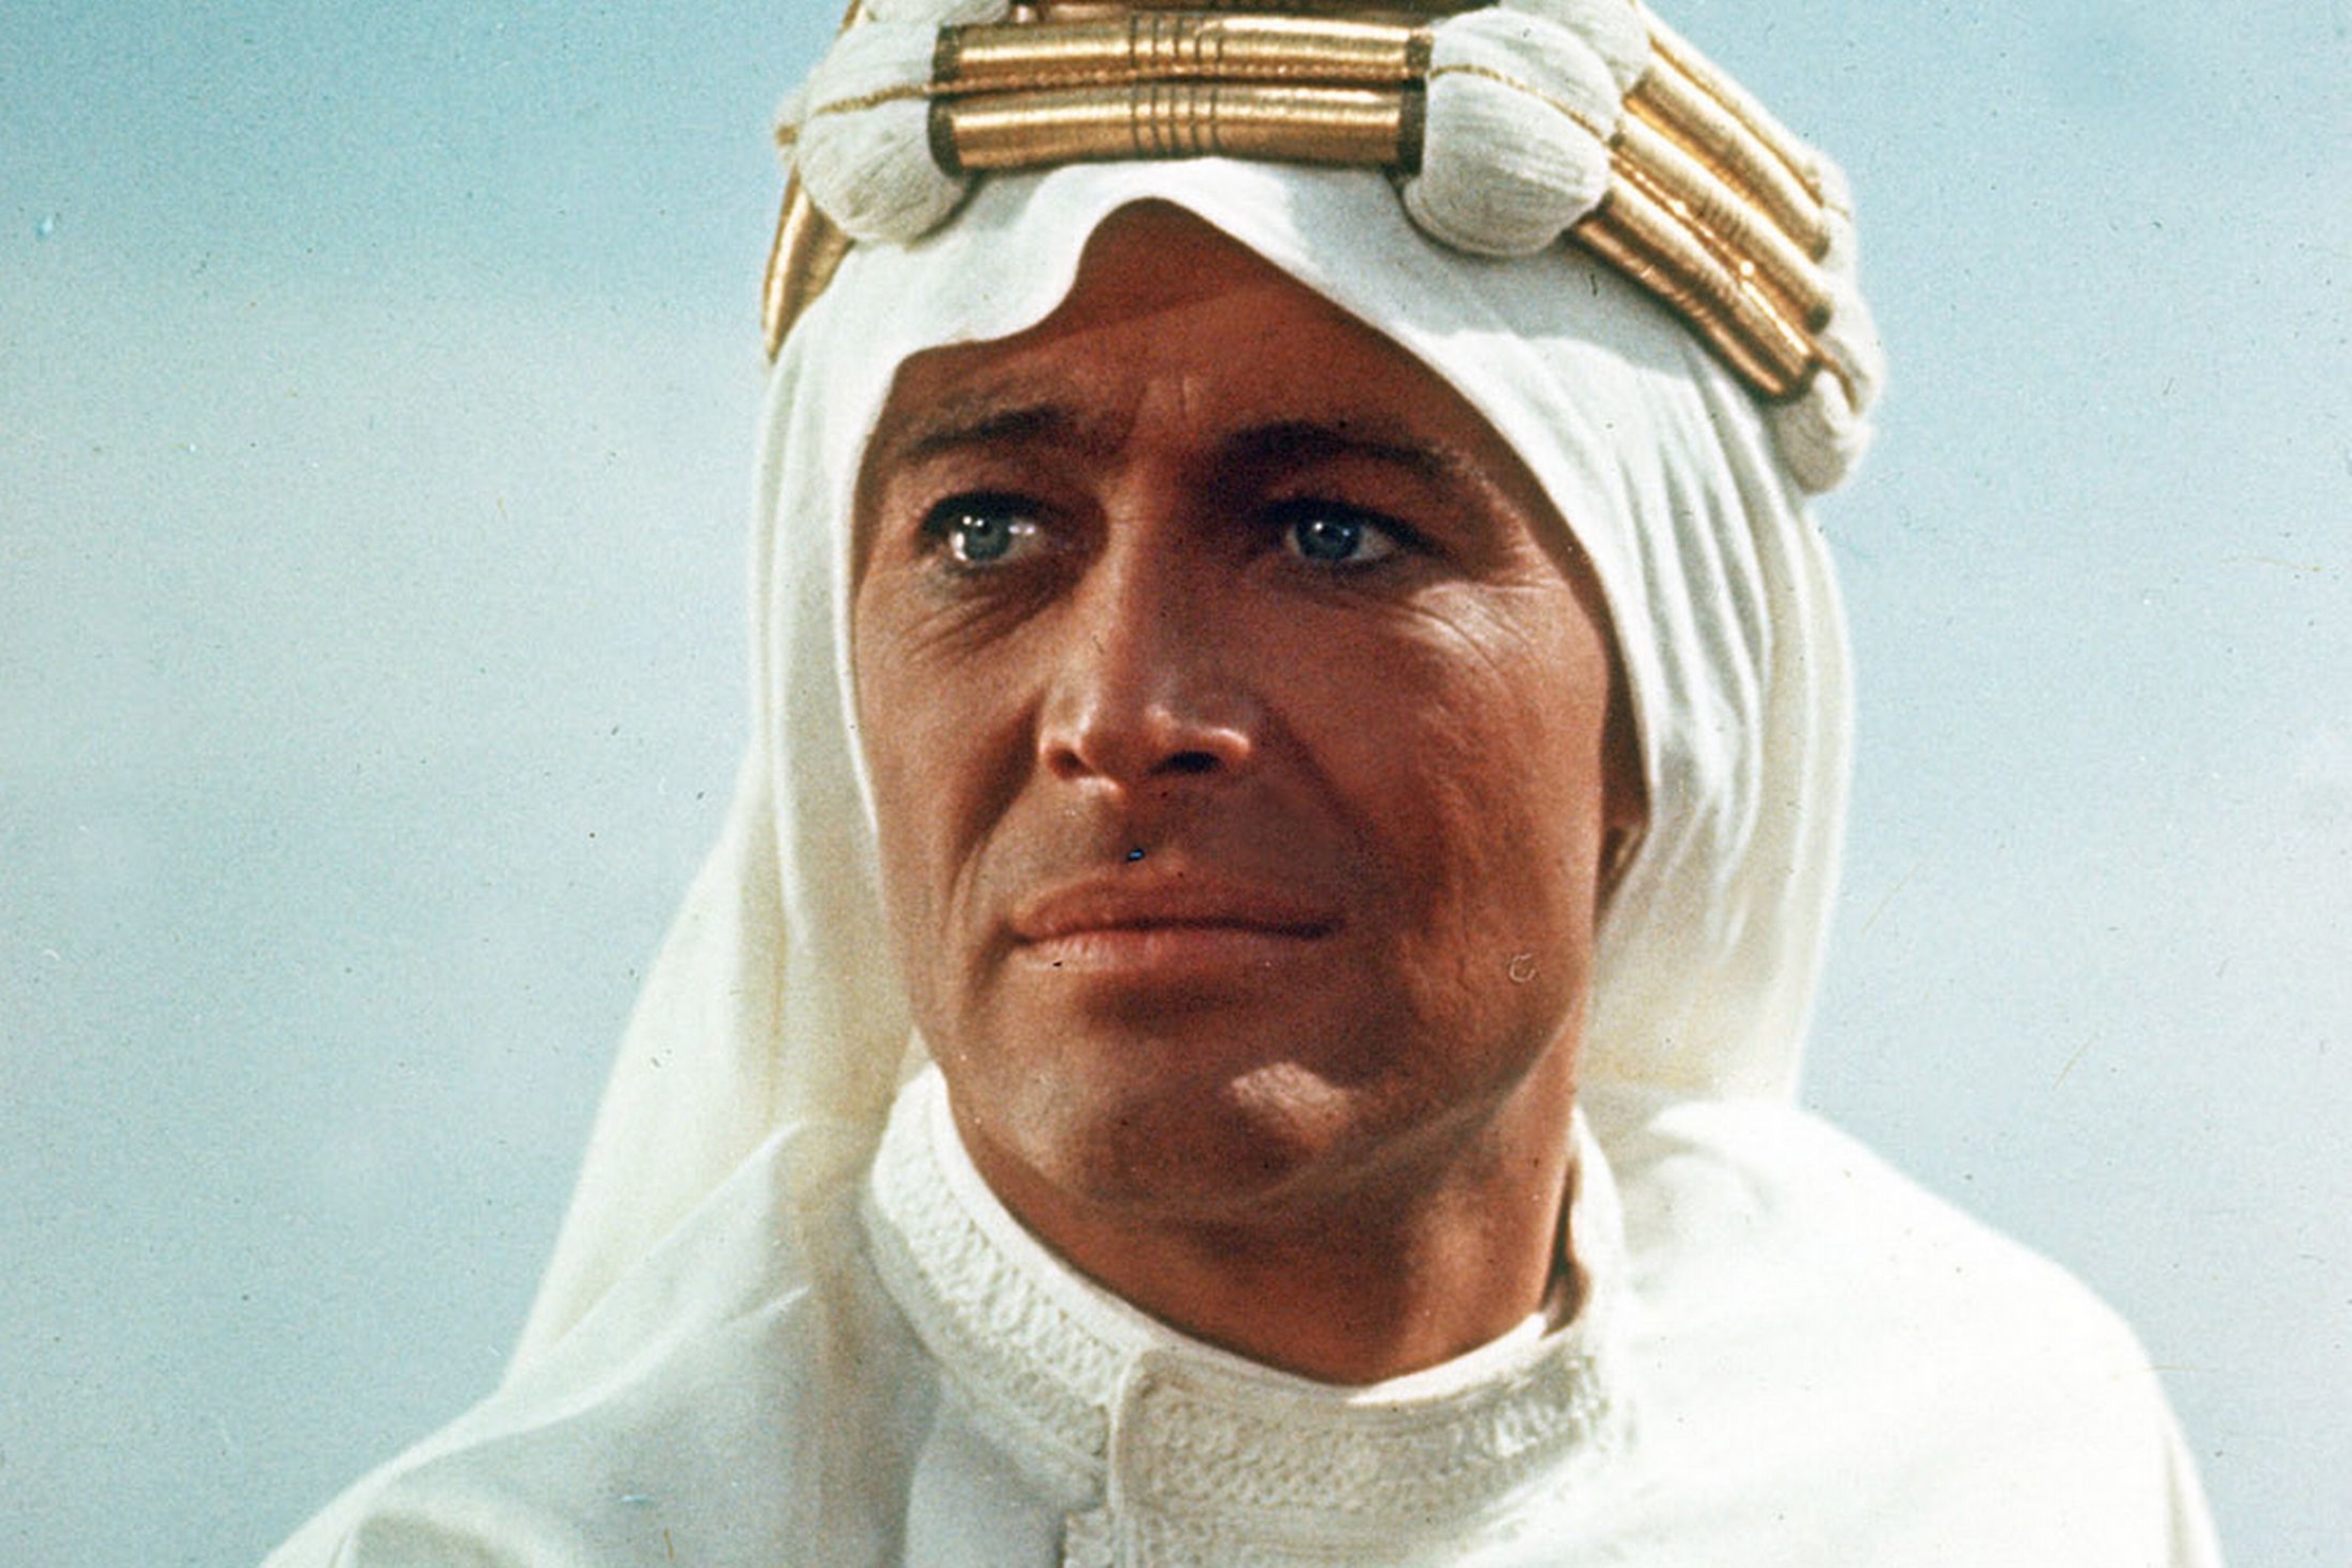 <p>When a movie begins with a character talking about the main character, before we even meet them, and they say, “He was the most extraordinary man I ever knew,” immediately you’re going to be like, “I’ve got to know more about this dude!” This opening line really set the stakes high for <em>Lawrence of Arabia</em>, but the Best Picture-winning epic cleared the bar.</p><p><a href='https://www.msn.com/en-us/community/channel/vid-cj9pqbr0vn9in2b6ddcd8sfgpfq6x6utp44fssrv6mc2gtybw0us'>Follow us on MSN to see more of our exclusive entertainment content.</a></p>